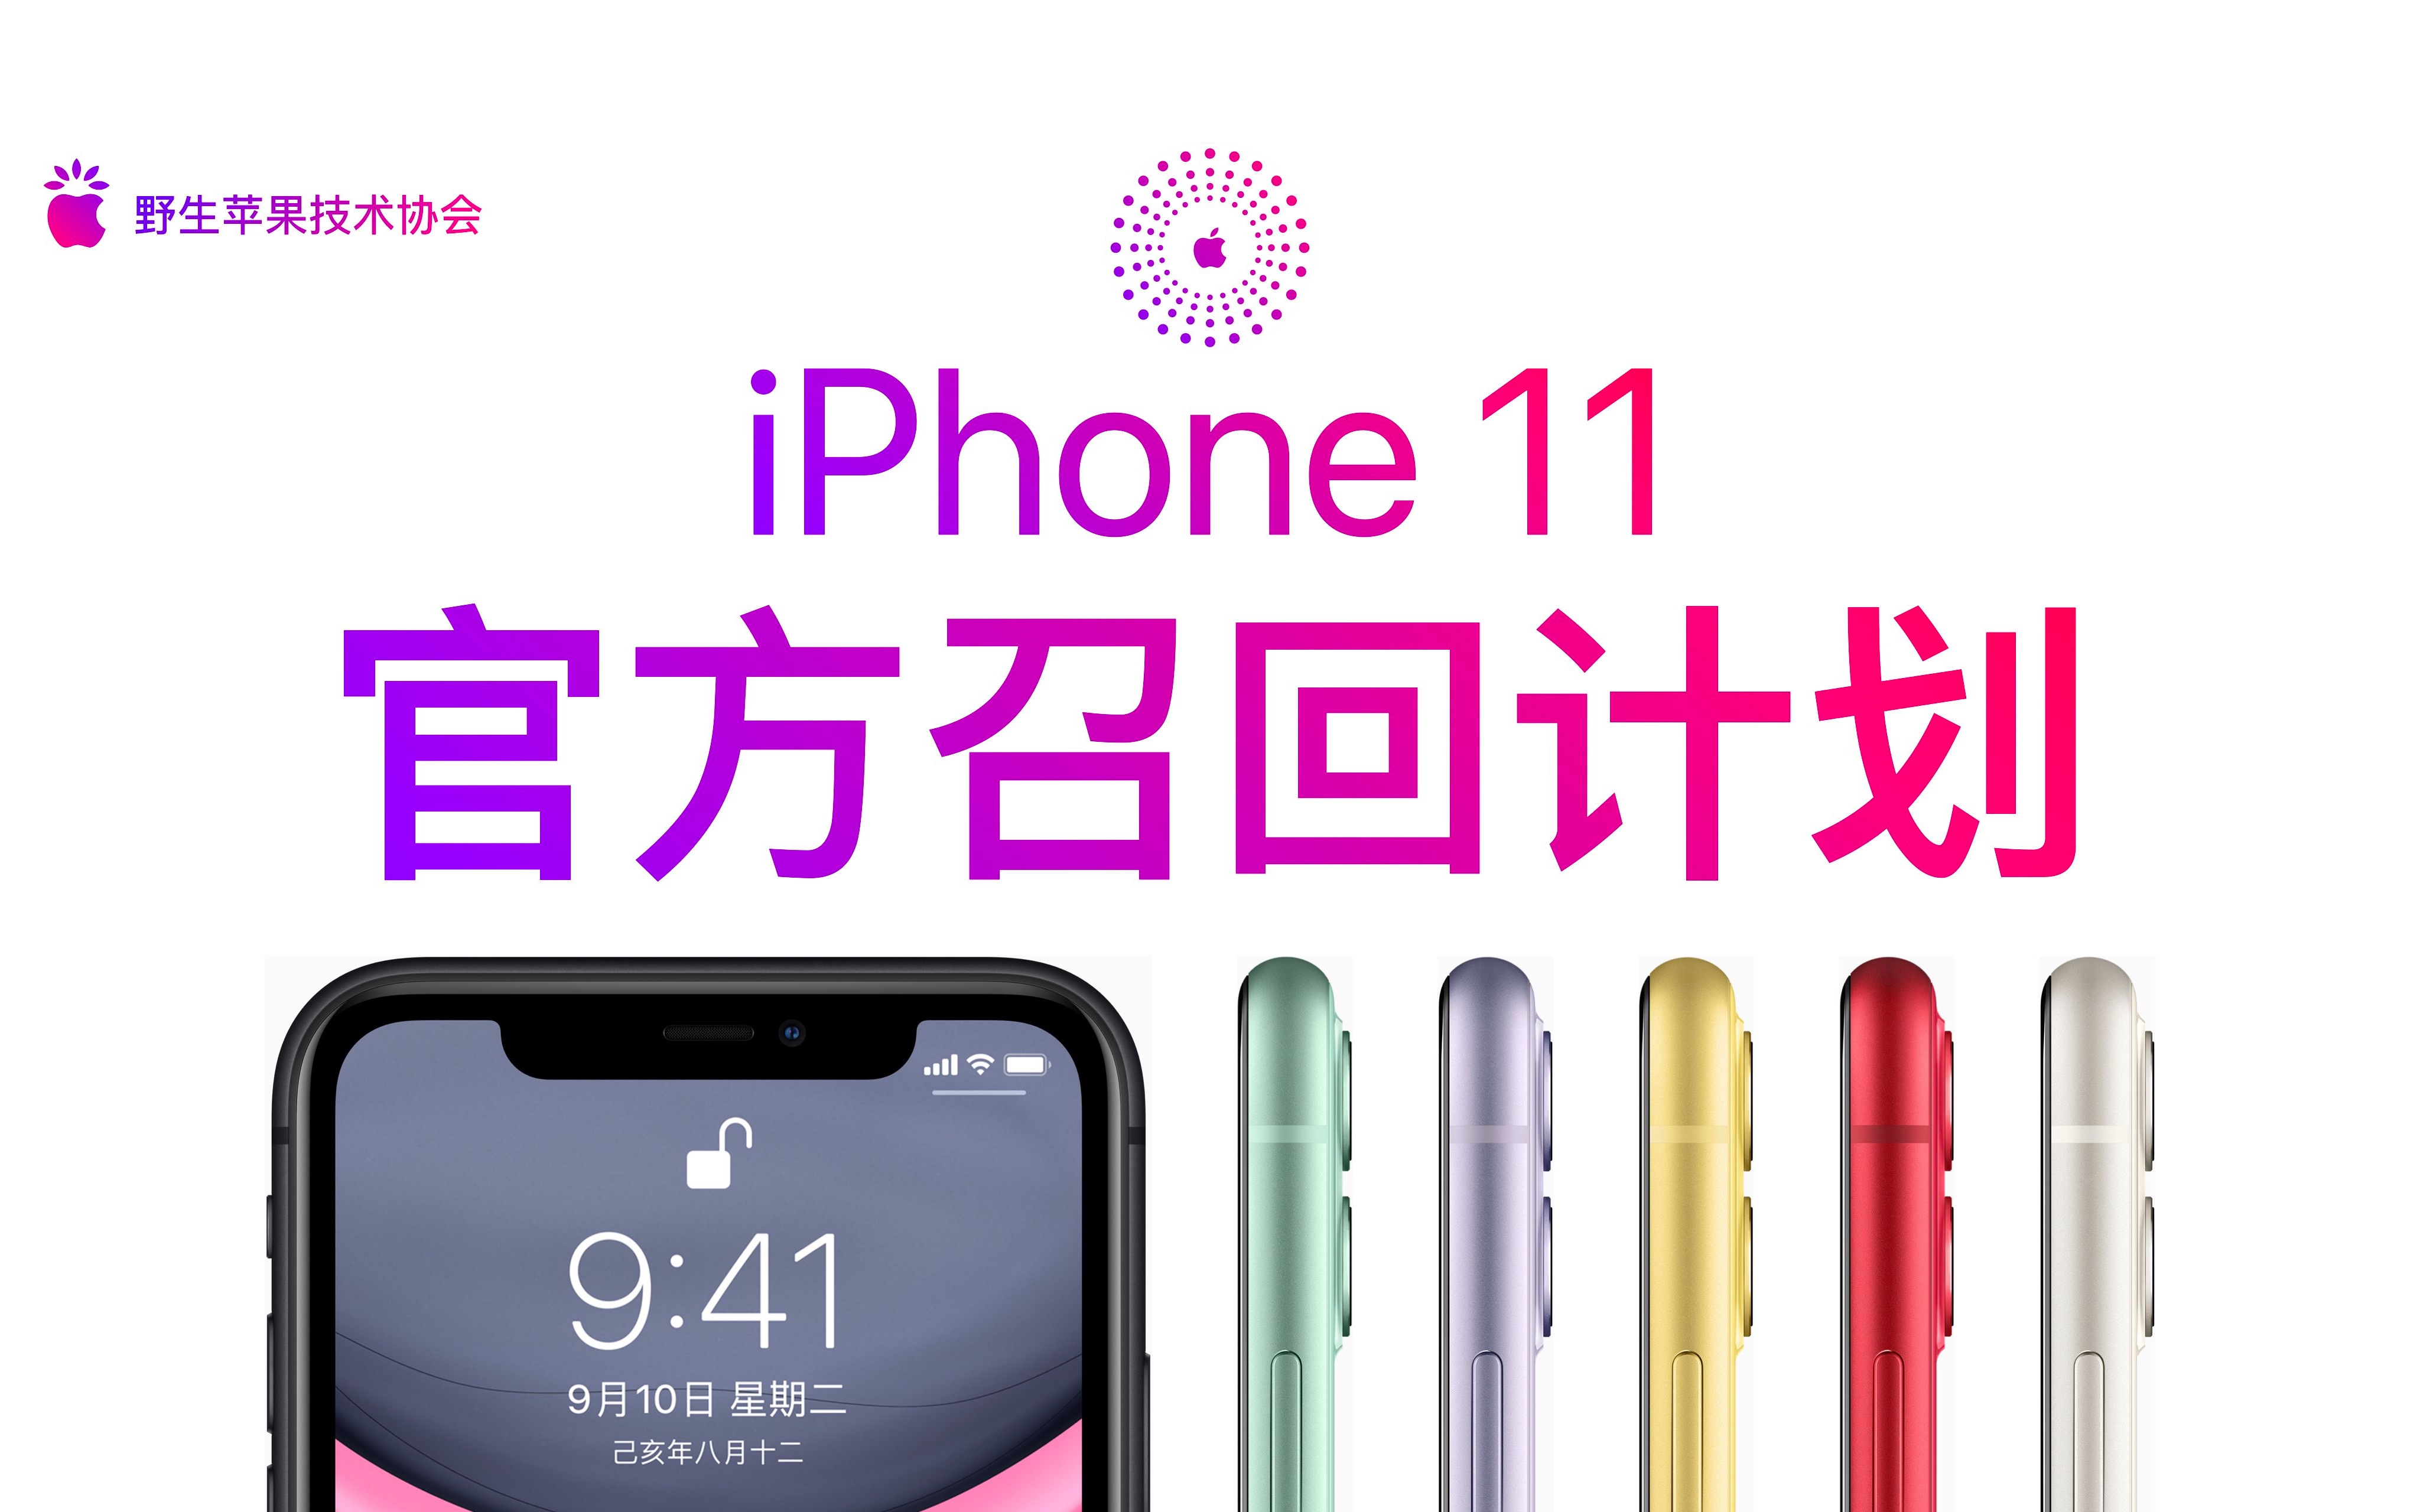 iPhone 11 官方召回计划